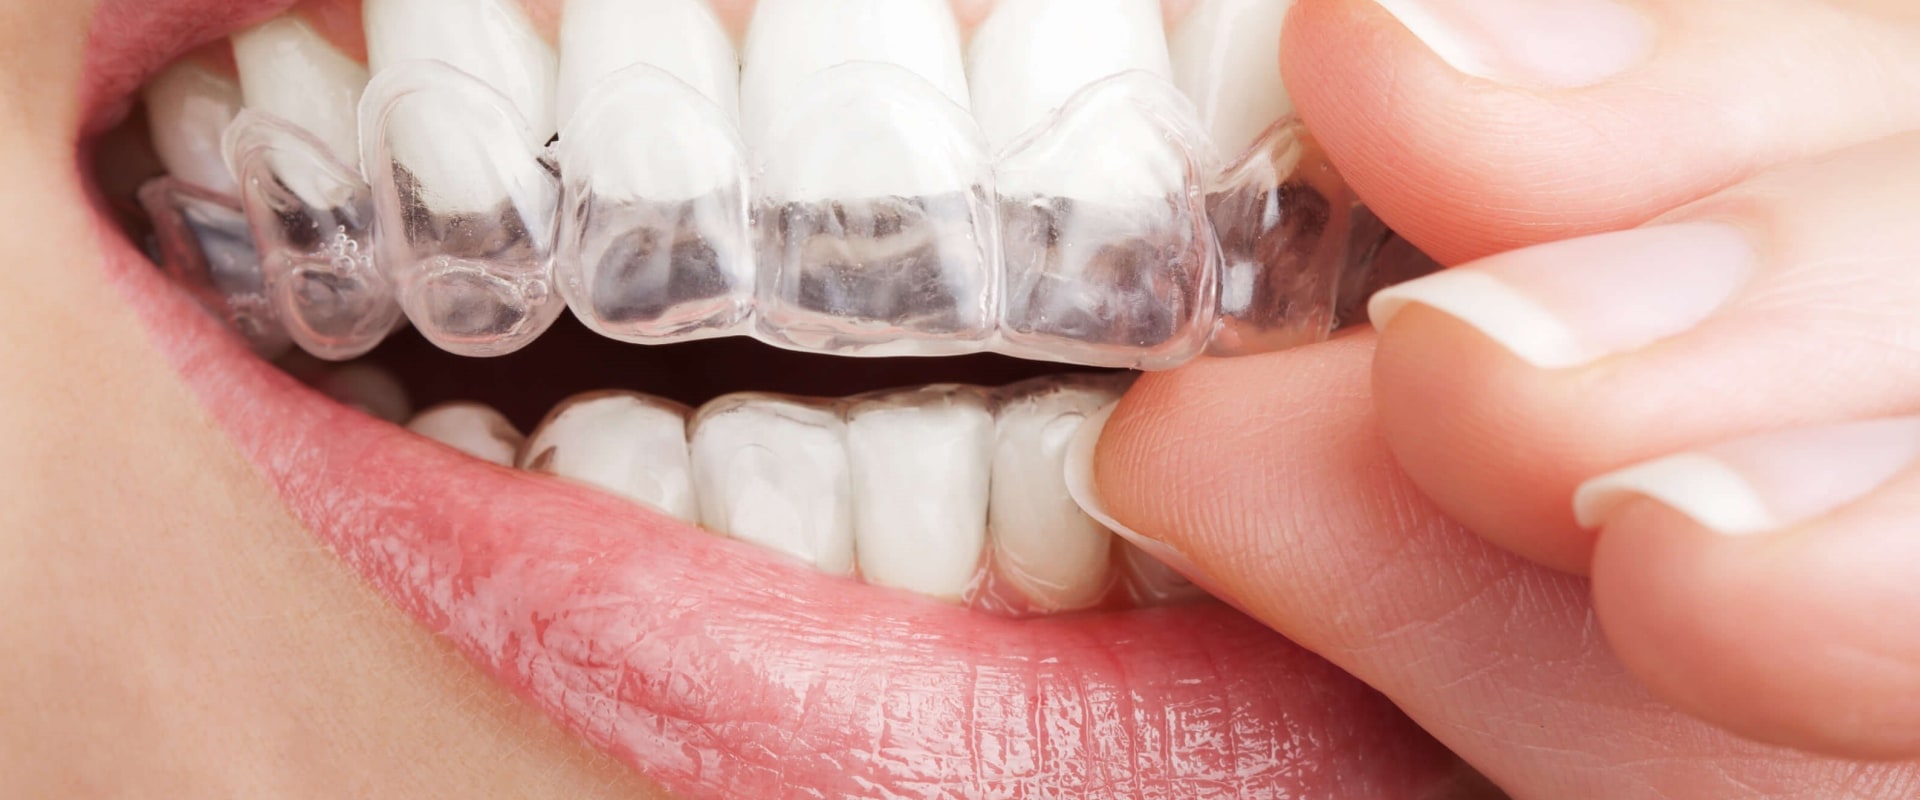 How Much Does Invisalign Treatment Cost? An Expert's Guide to Affordable Solutions